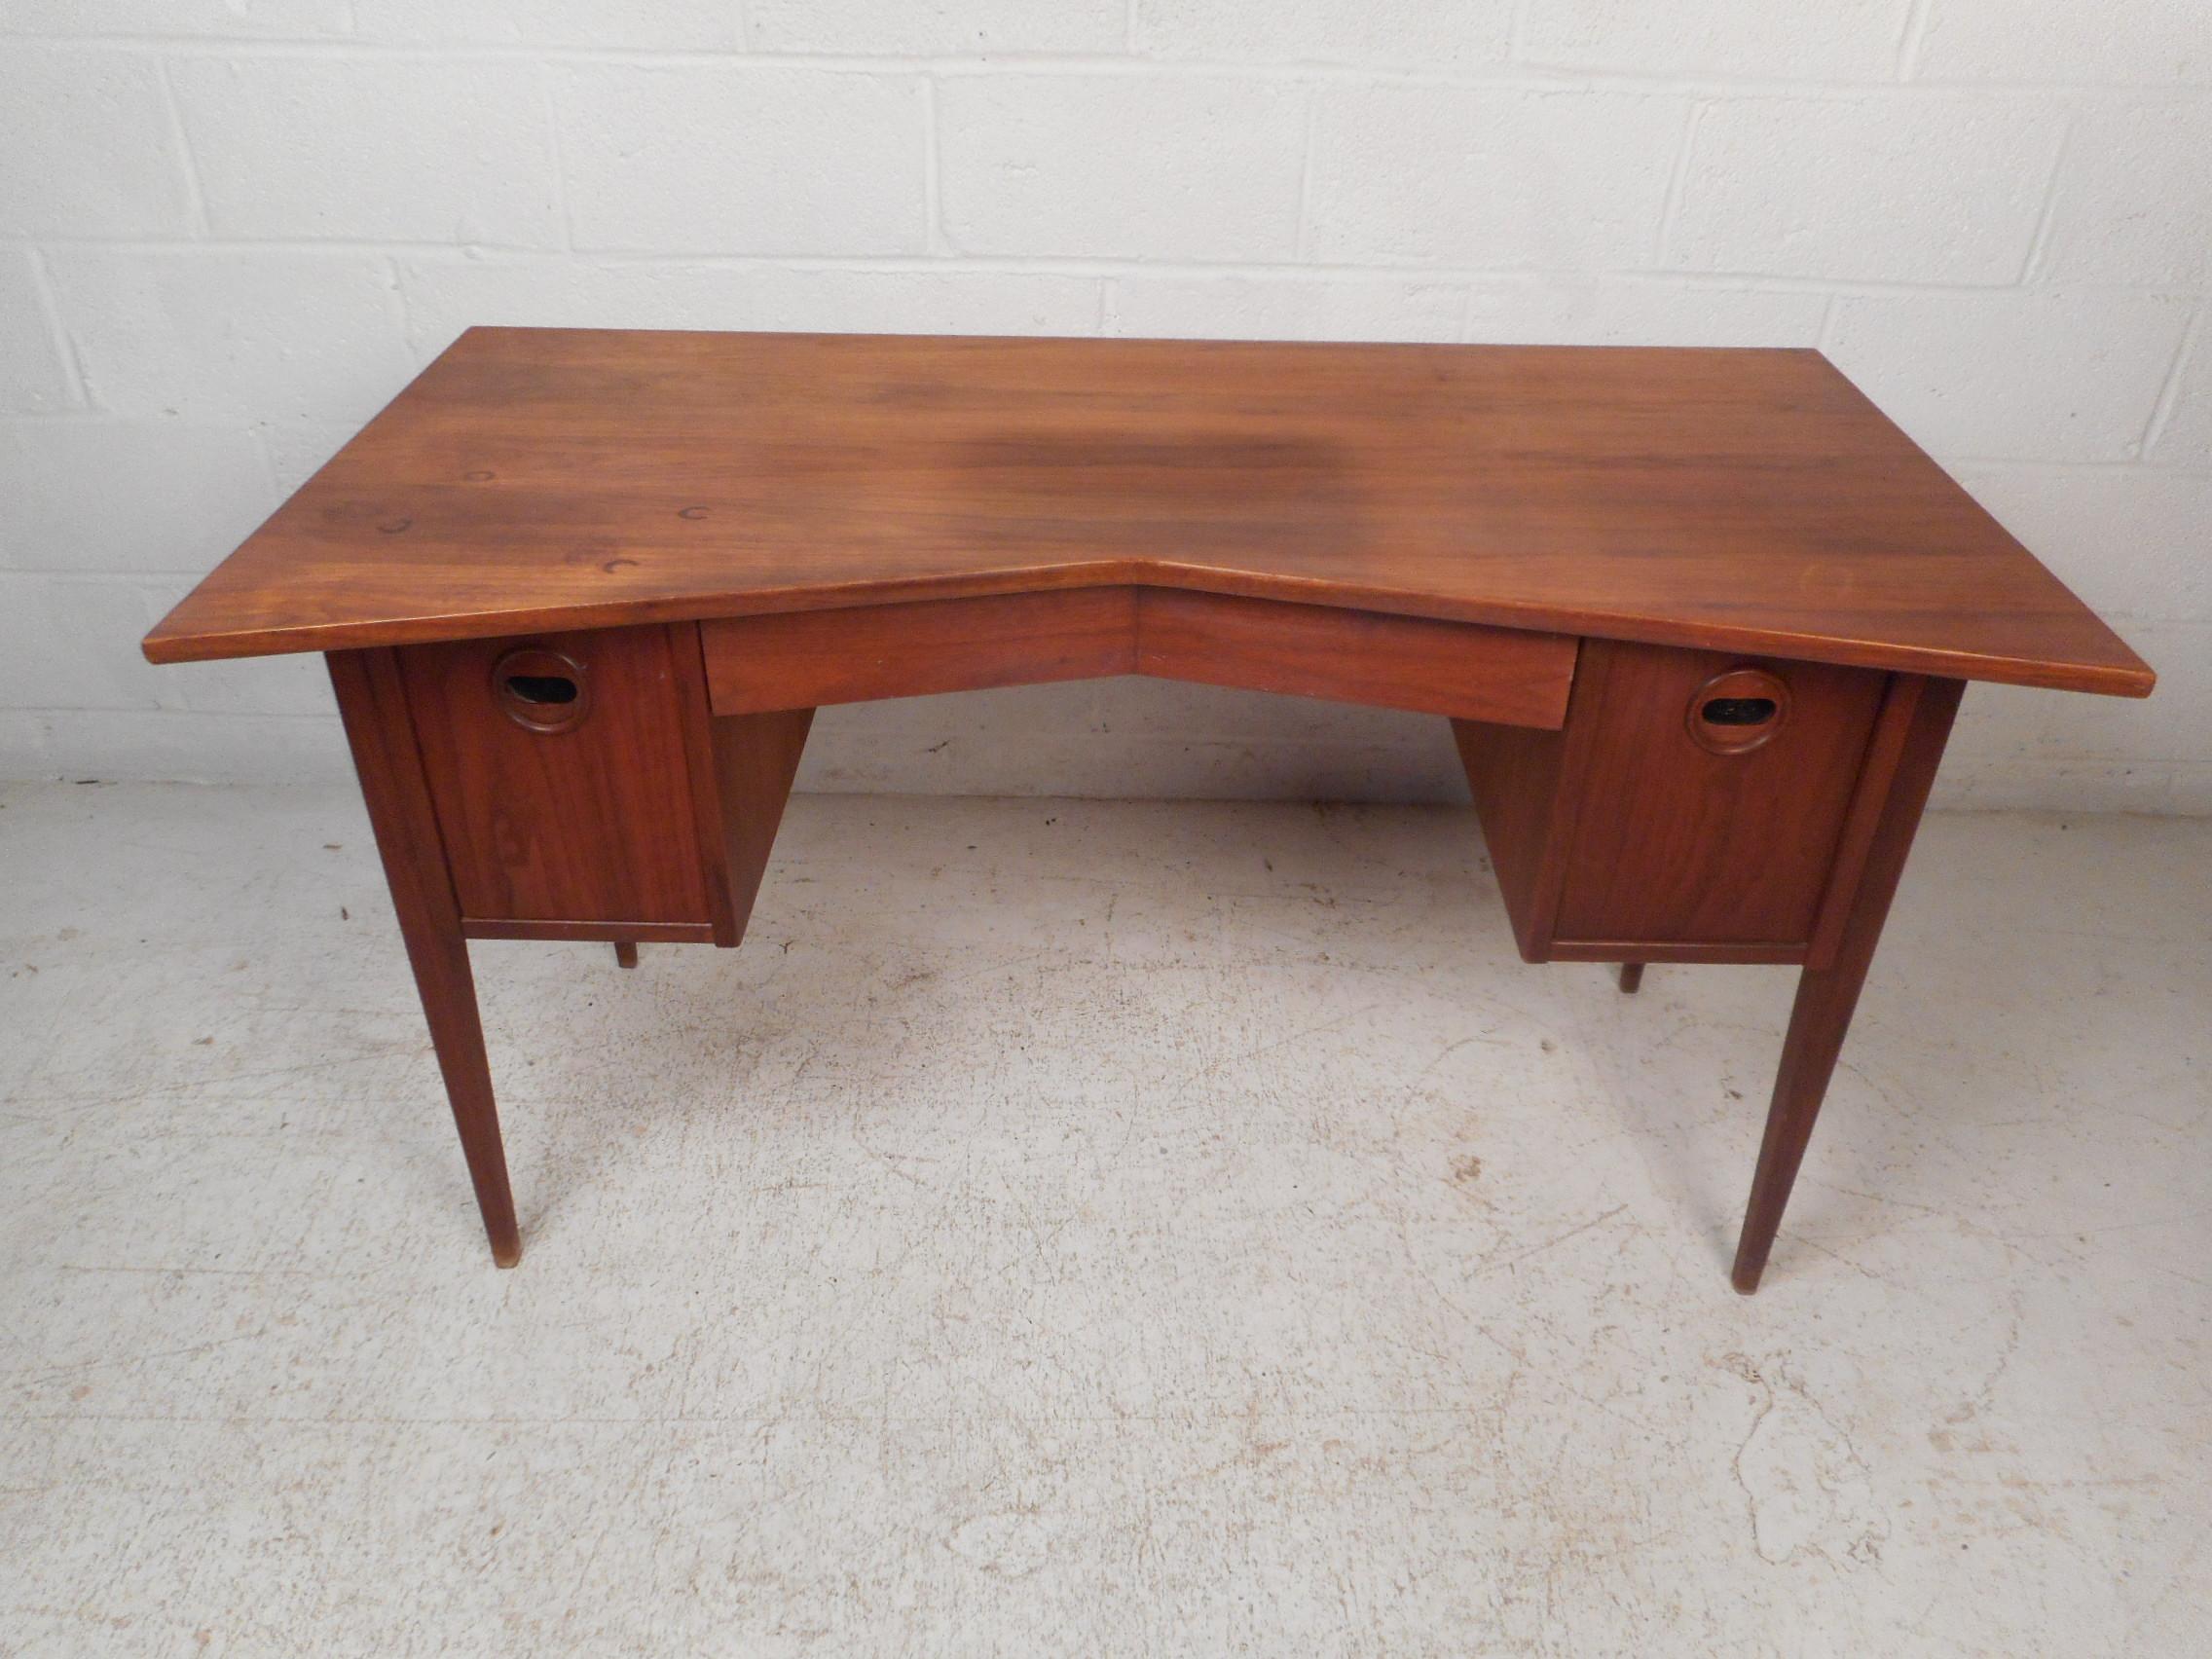 Stylish and unusual midcentury desk. An angular desk front and drawer give this piece a very unique look. A pair of oversized drawers on either side of the desk offer ample storage/filing space. A panel of woven cane adorns the back of the desk